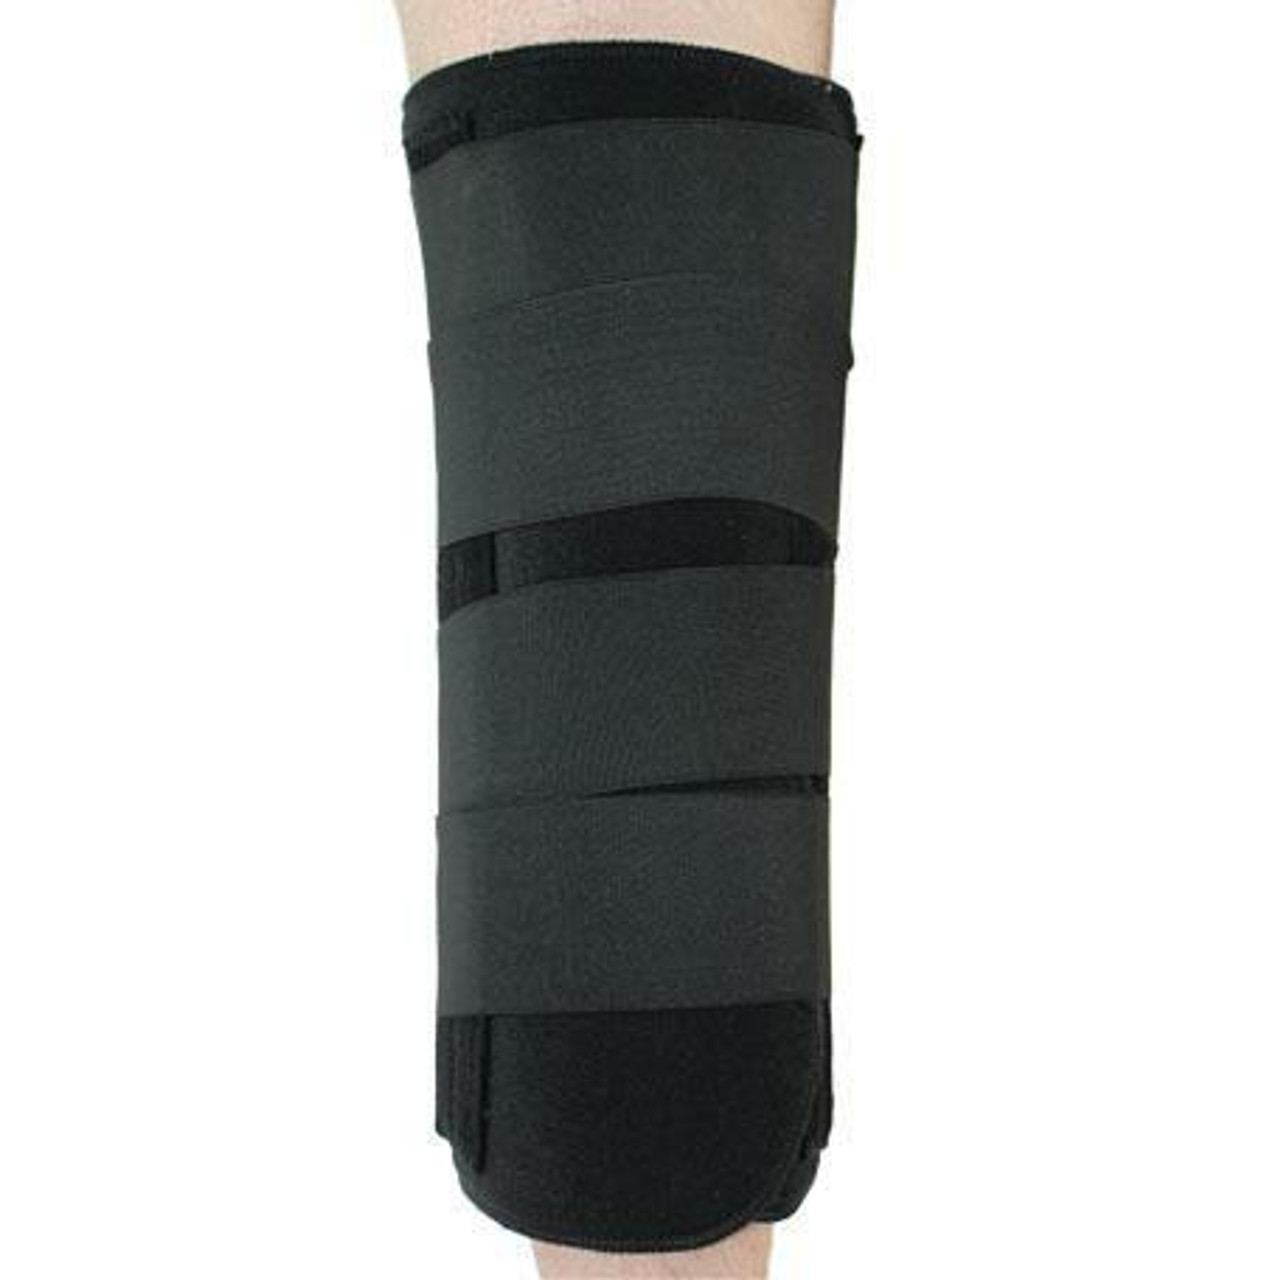 Breg Quick Wrap Knee Immobilizer ACL PCL MCL LCL